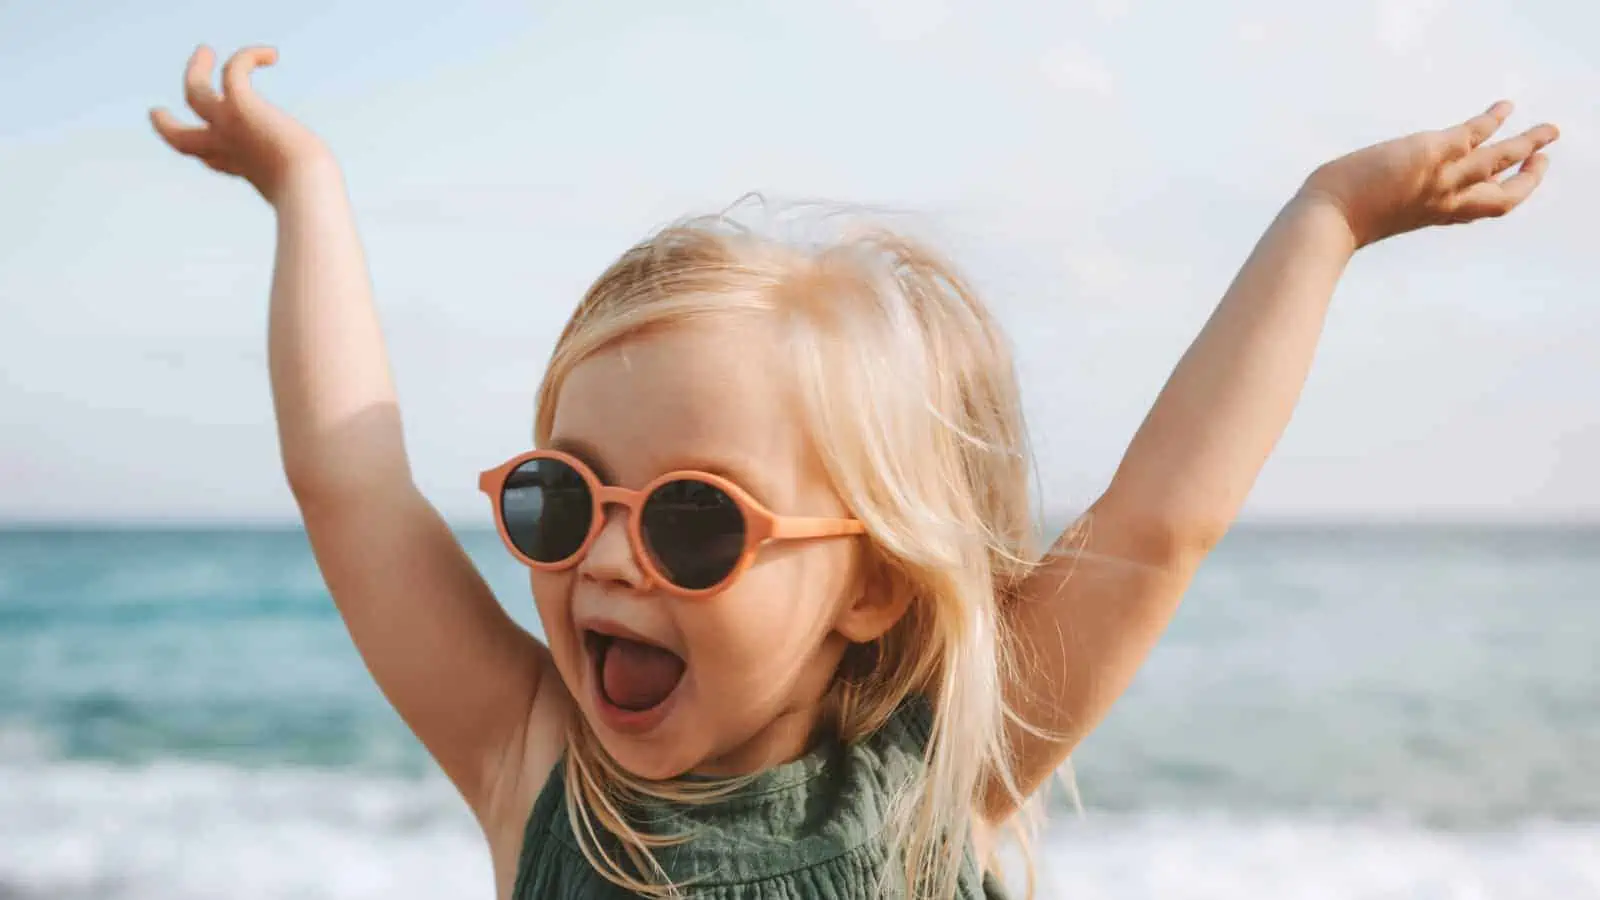 little girl happy at the beach sunglasses arms up laughing smiling